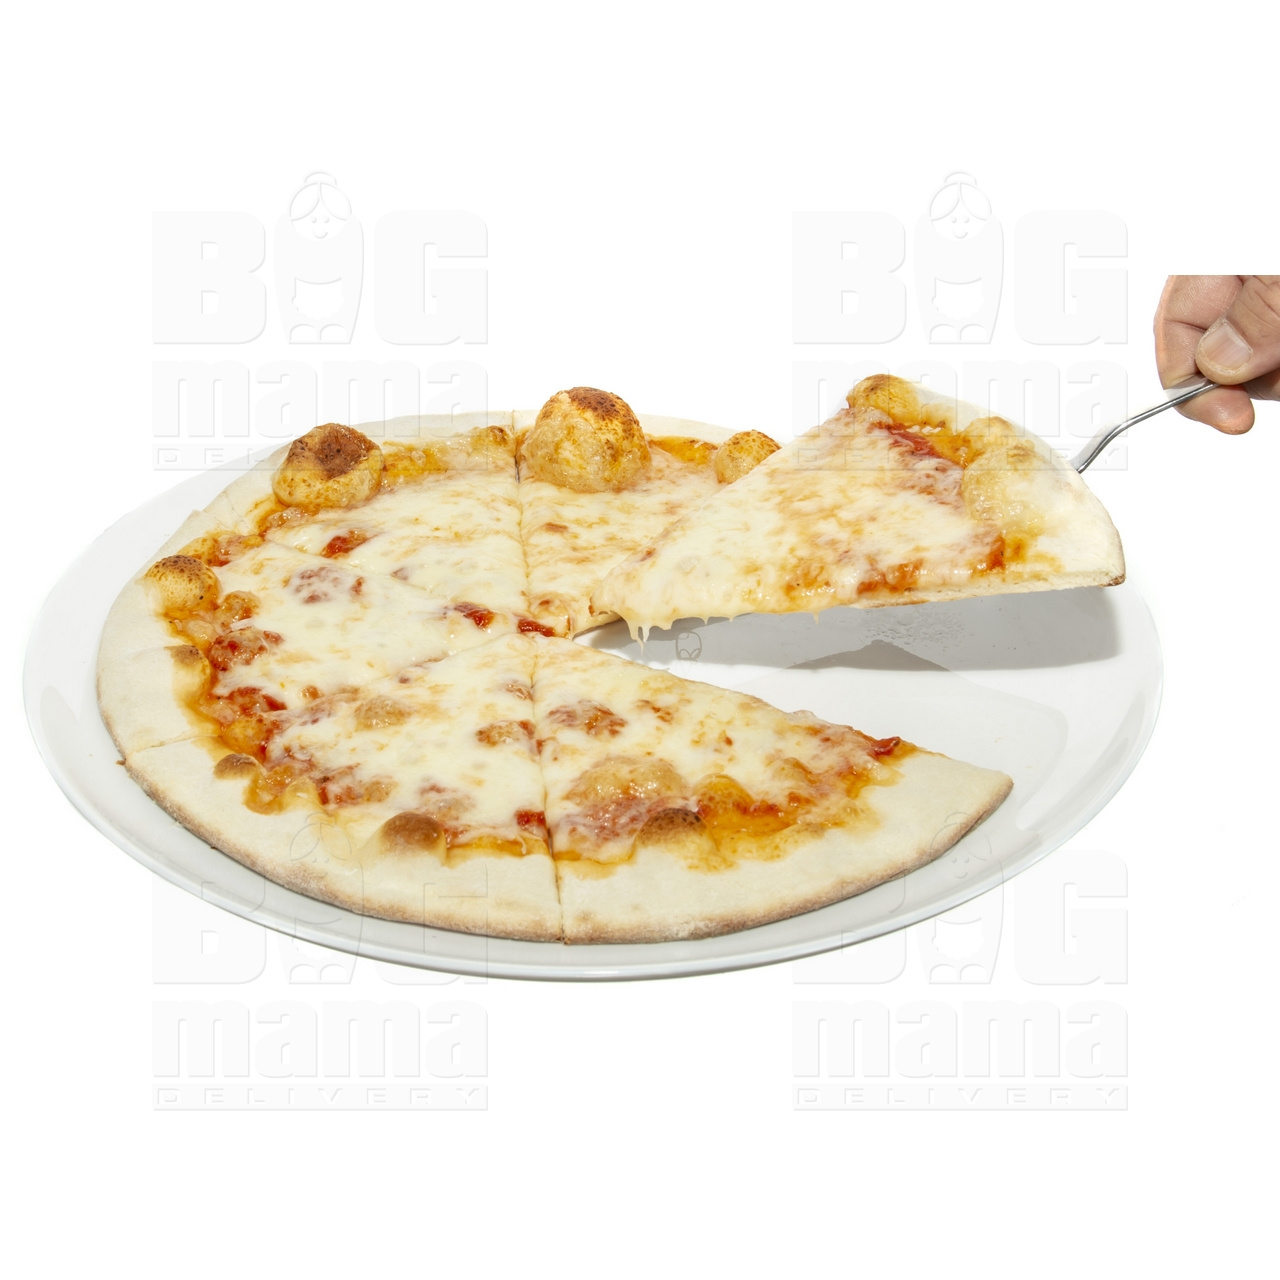 Product #211 image - Margherita pizza